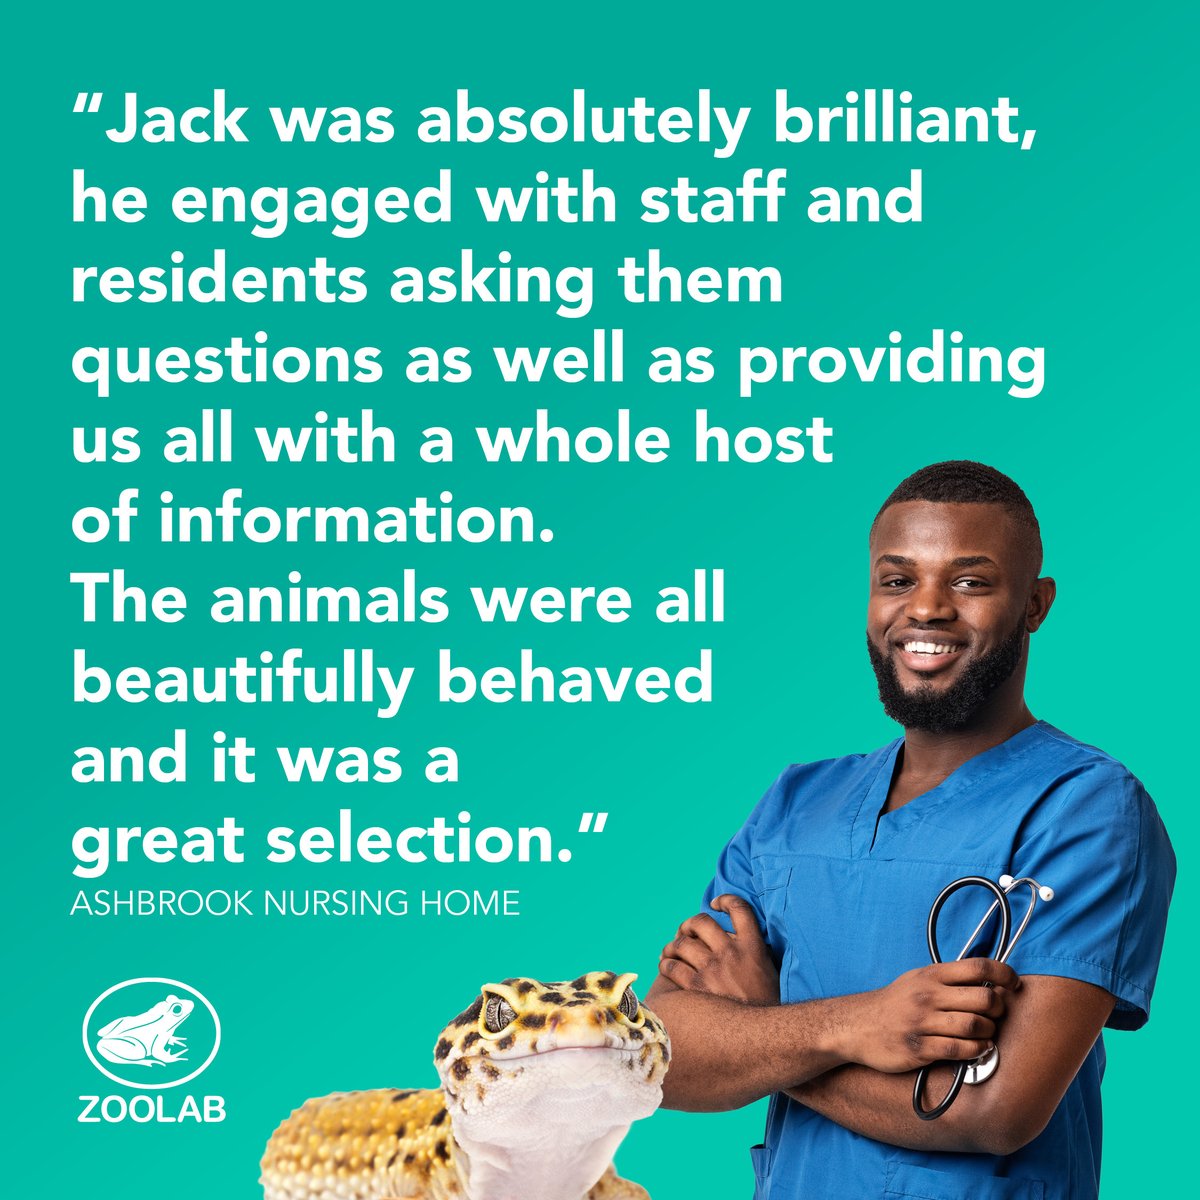 Our workshops are tailored to fit your needs! But don’t just take our word for it, book your own session today! Email us at info@zoolabuk.com #ukedchat #edteach #scottishteacher